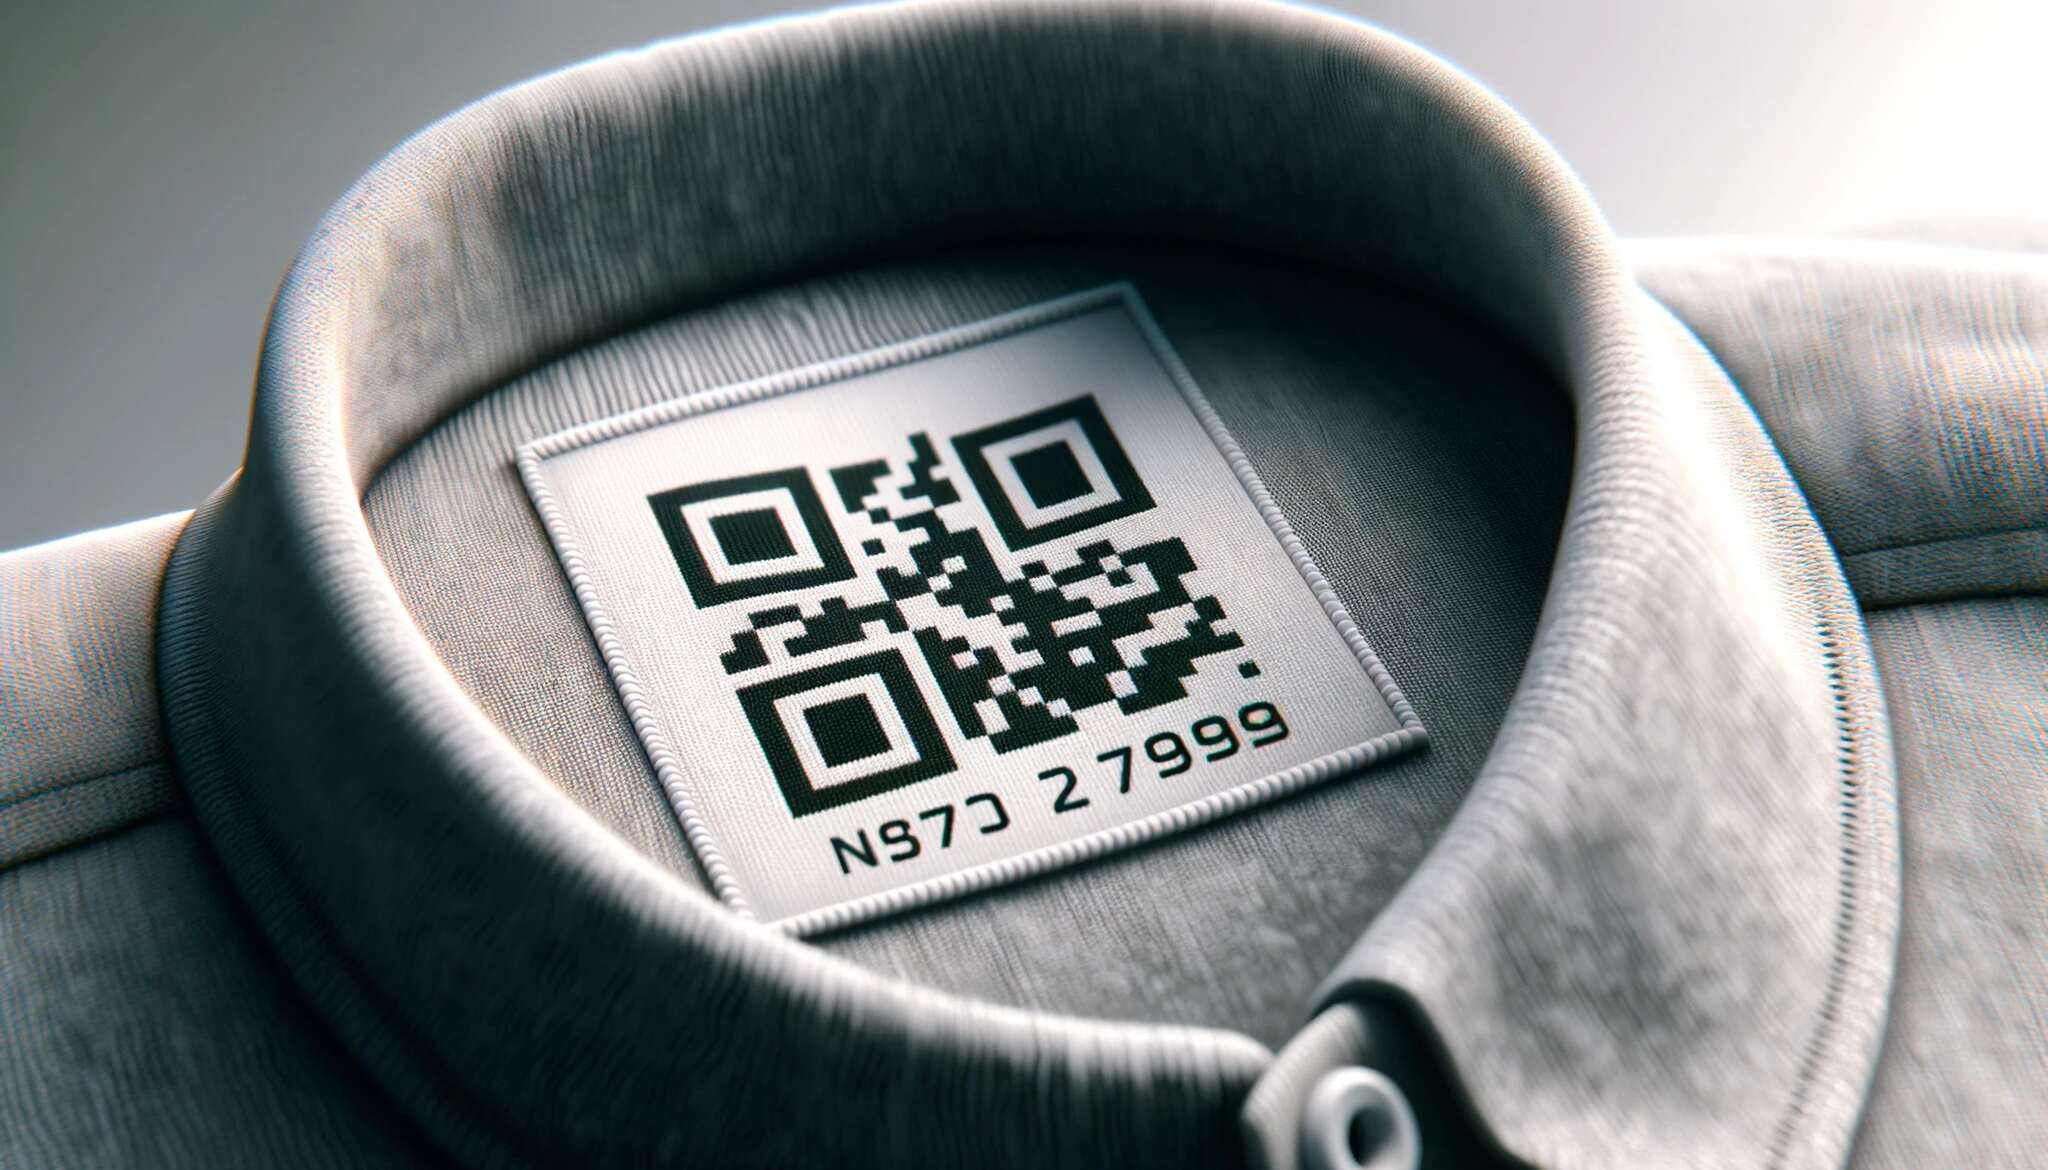  piece of clothing with a small QR code